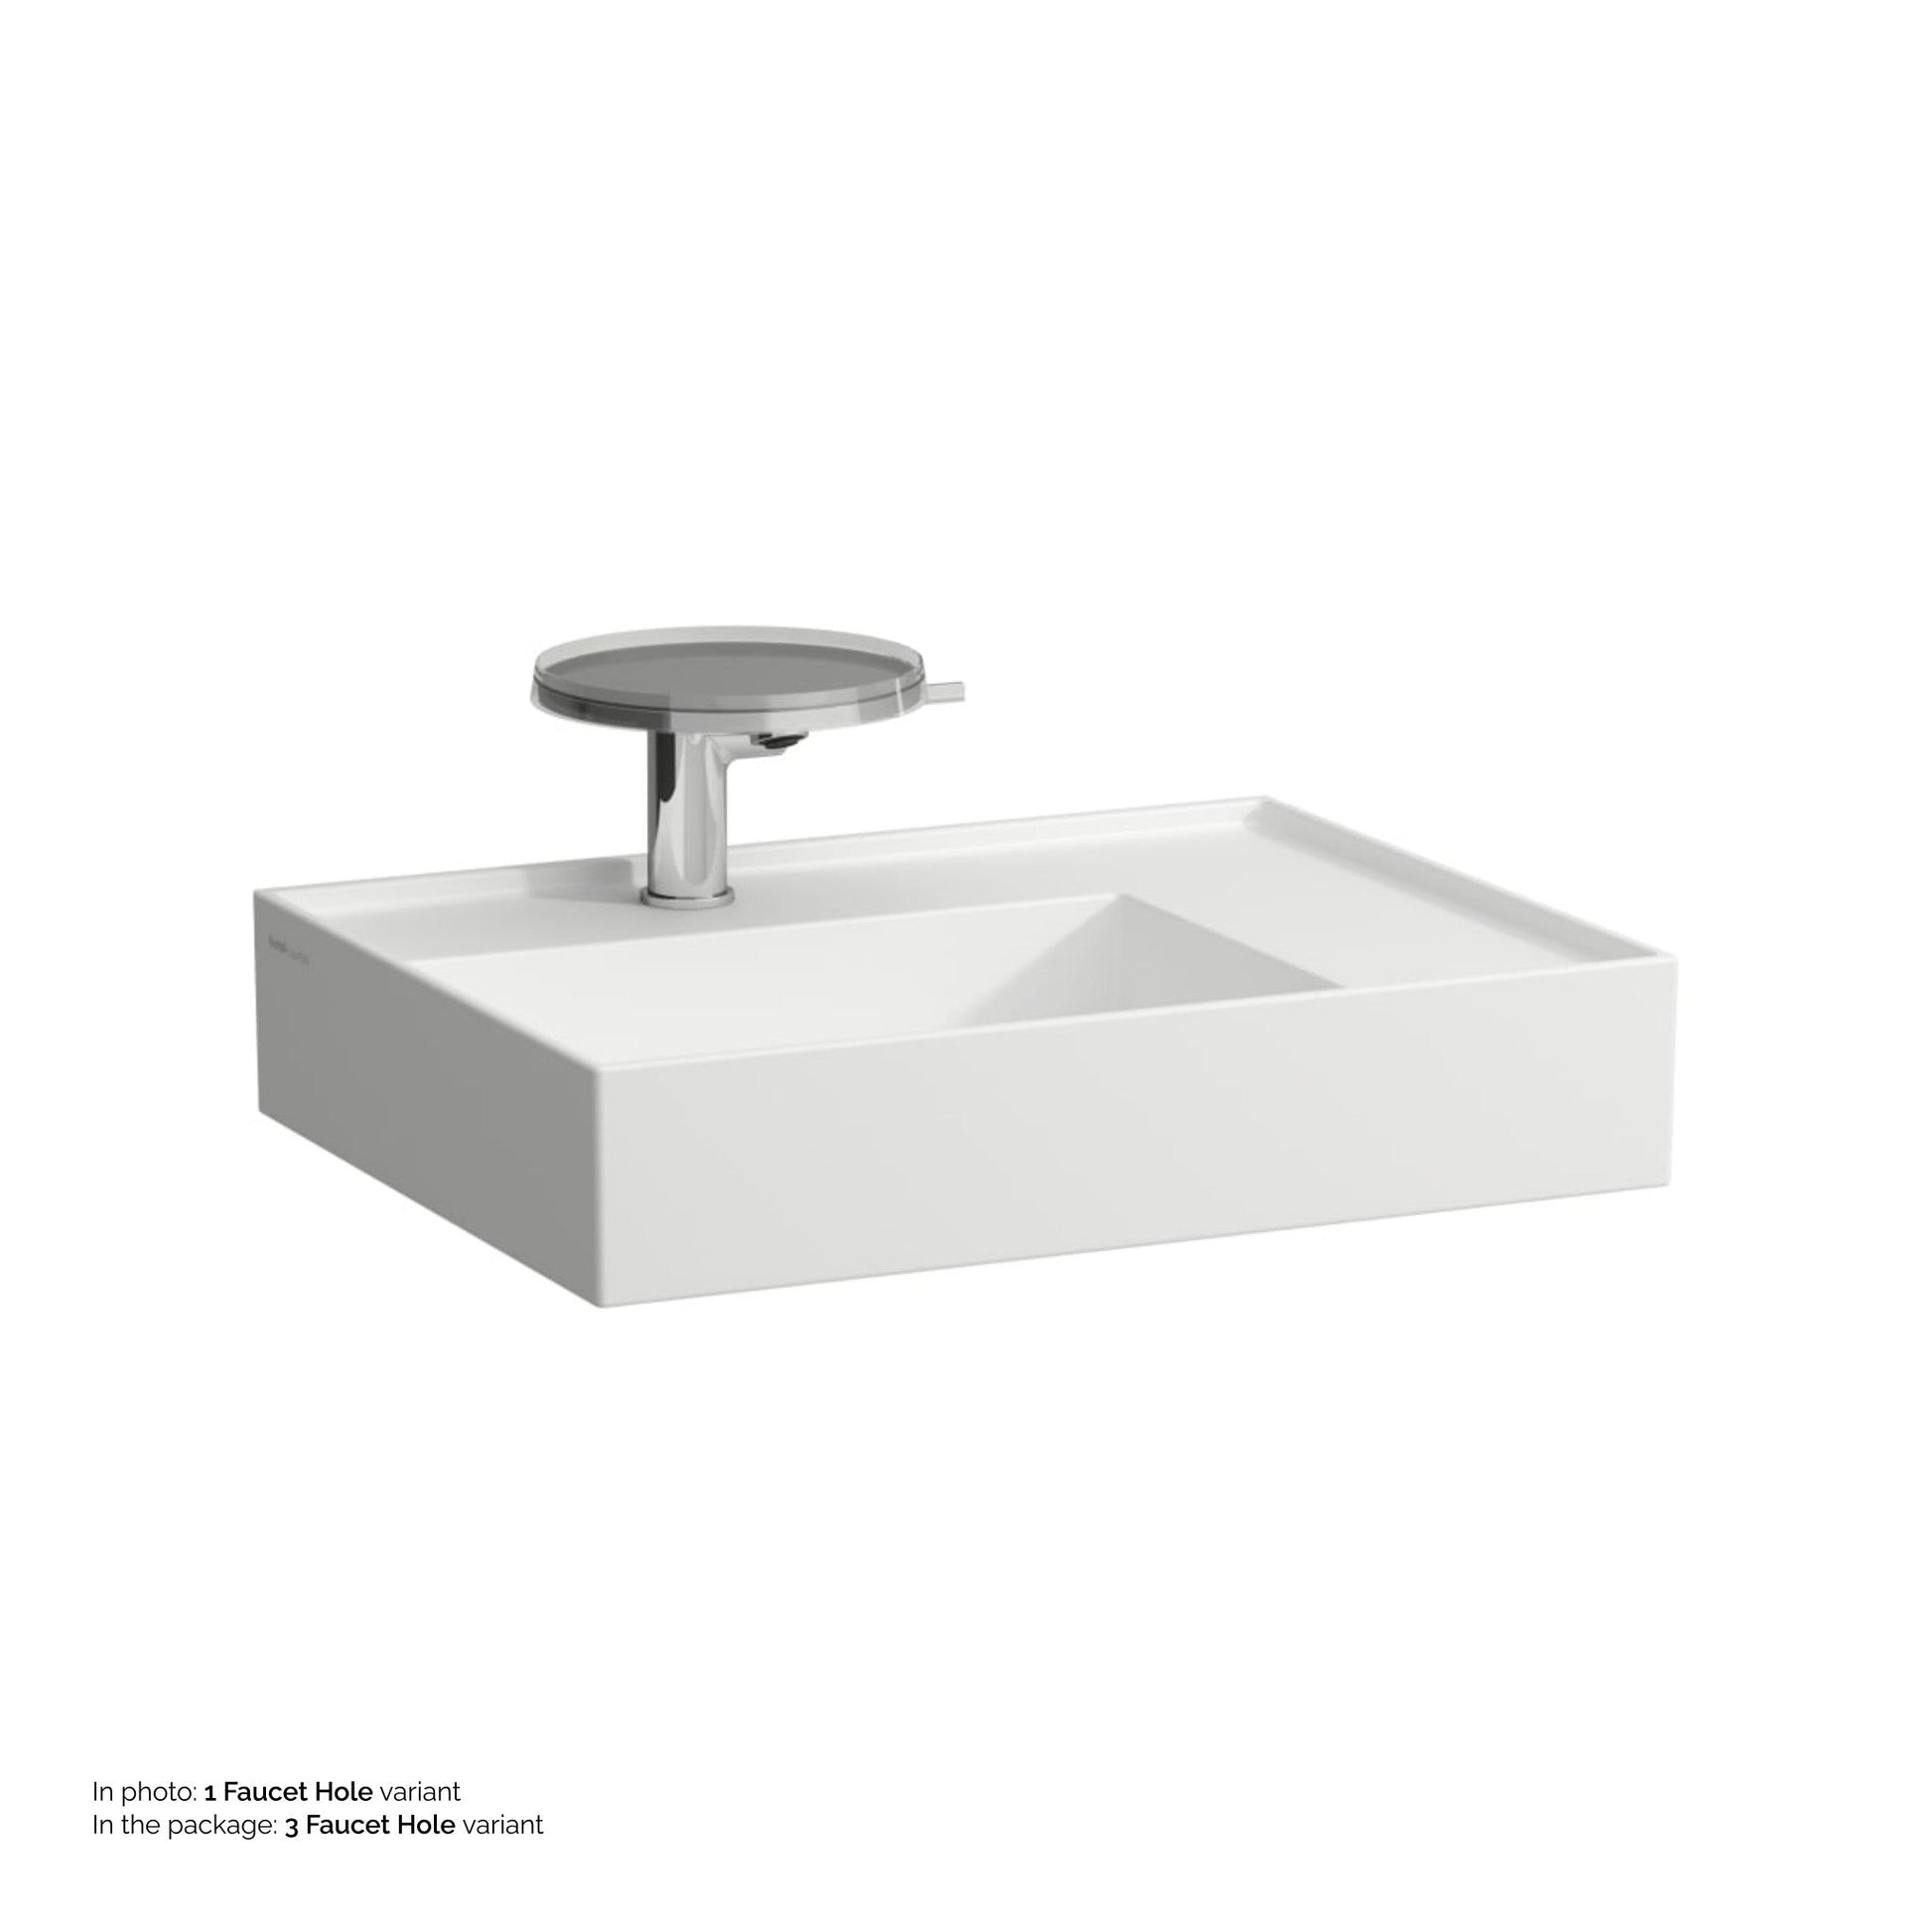 Laufen Kartell 24" x 18" Matte White Countertop Shelf-Right Bathroom Sink With 3 Faucet Holes